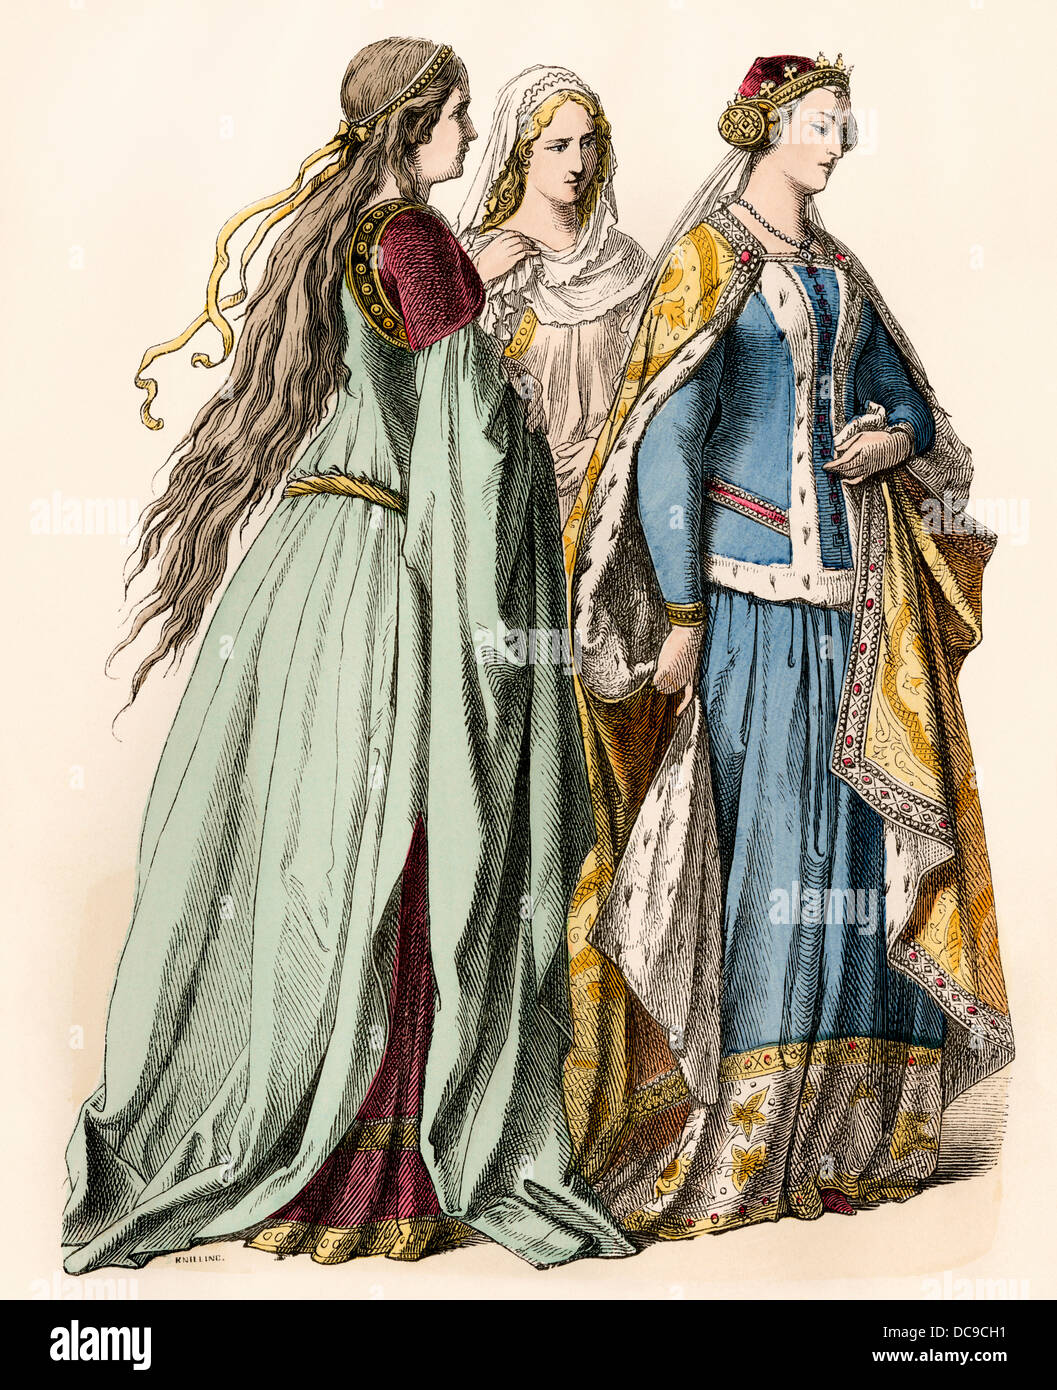 Ladies attending an English princess of the 14th century. Hand-colored print Stock Photo